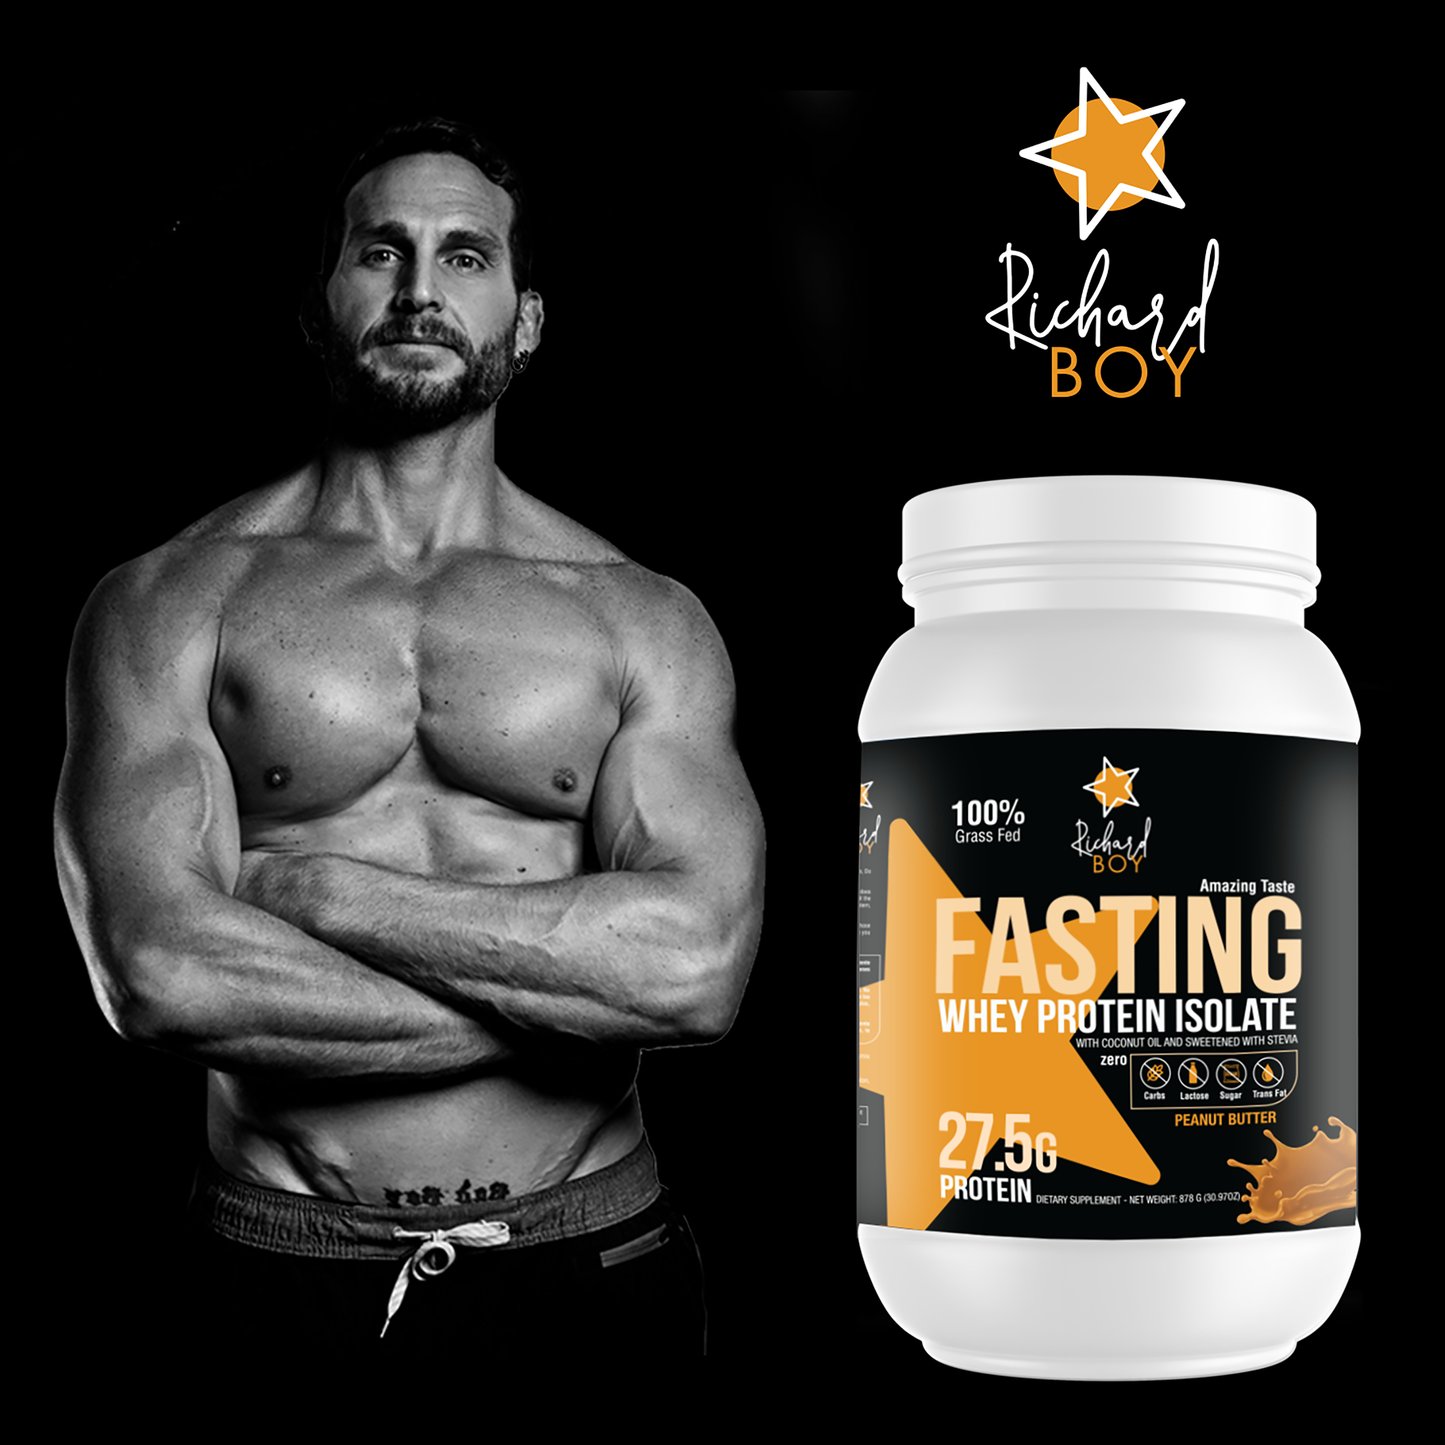 
                  
                    Richard Boy Fasting Whey Protein Isolate Peanut Butter Flavor- 100 % Grass Fed, Natural Protein Powder, Enriched with Coconut Oil - Peanut Butter Flavor
                  
                